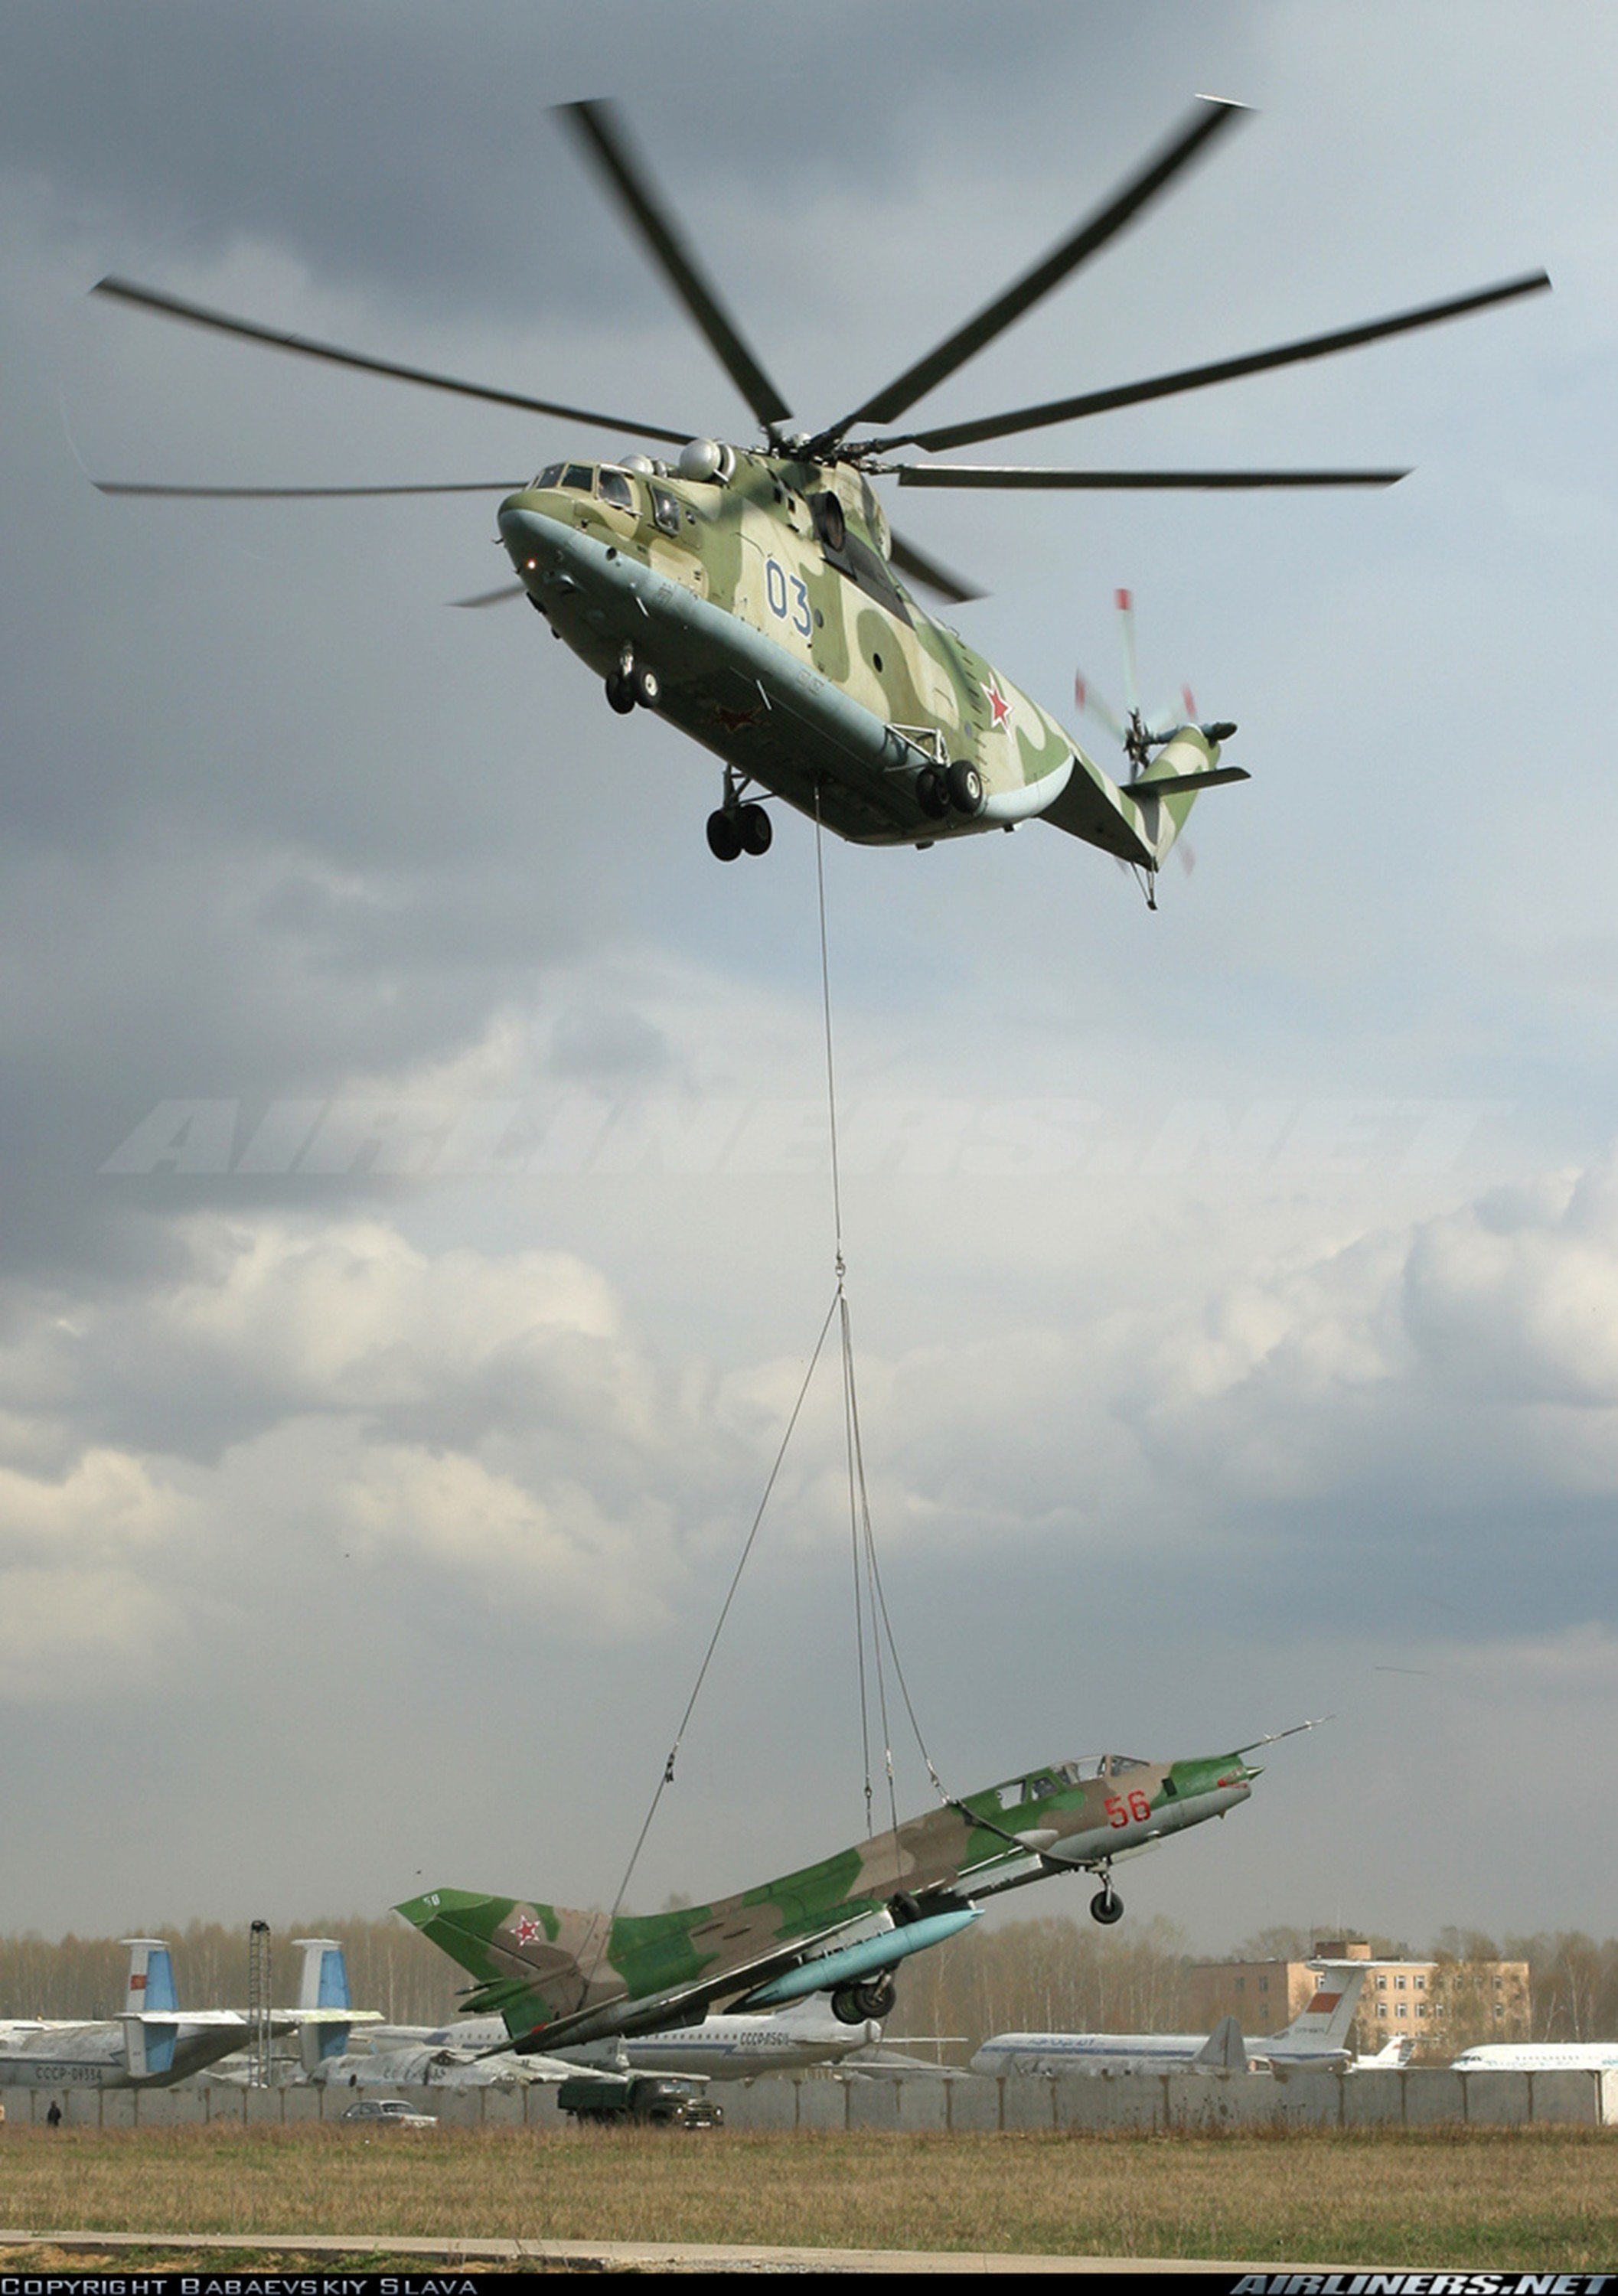 russian, Red, Star, Russia, Helicopter, Aircraft, Vehicle, Military, Army, Mil mi, Cargo Wallpaper